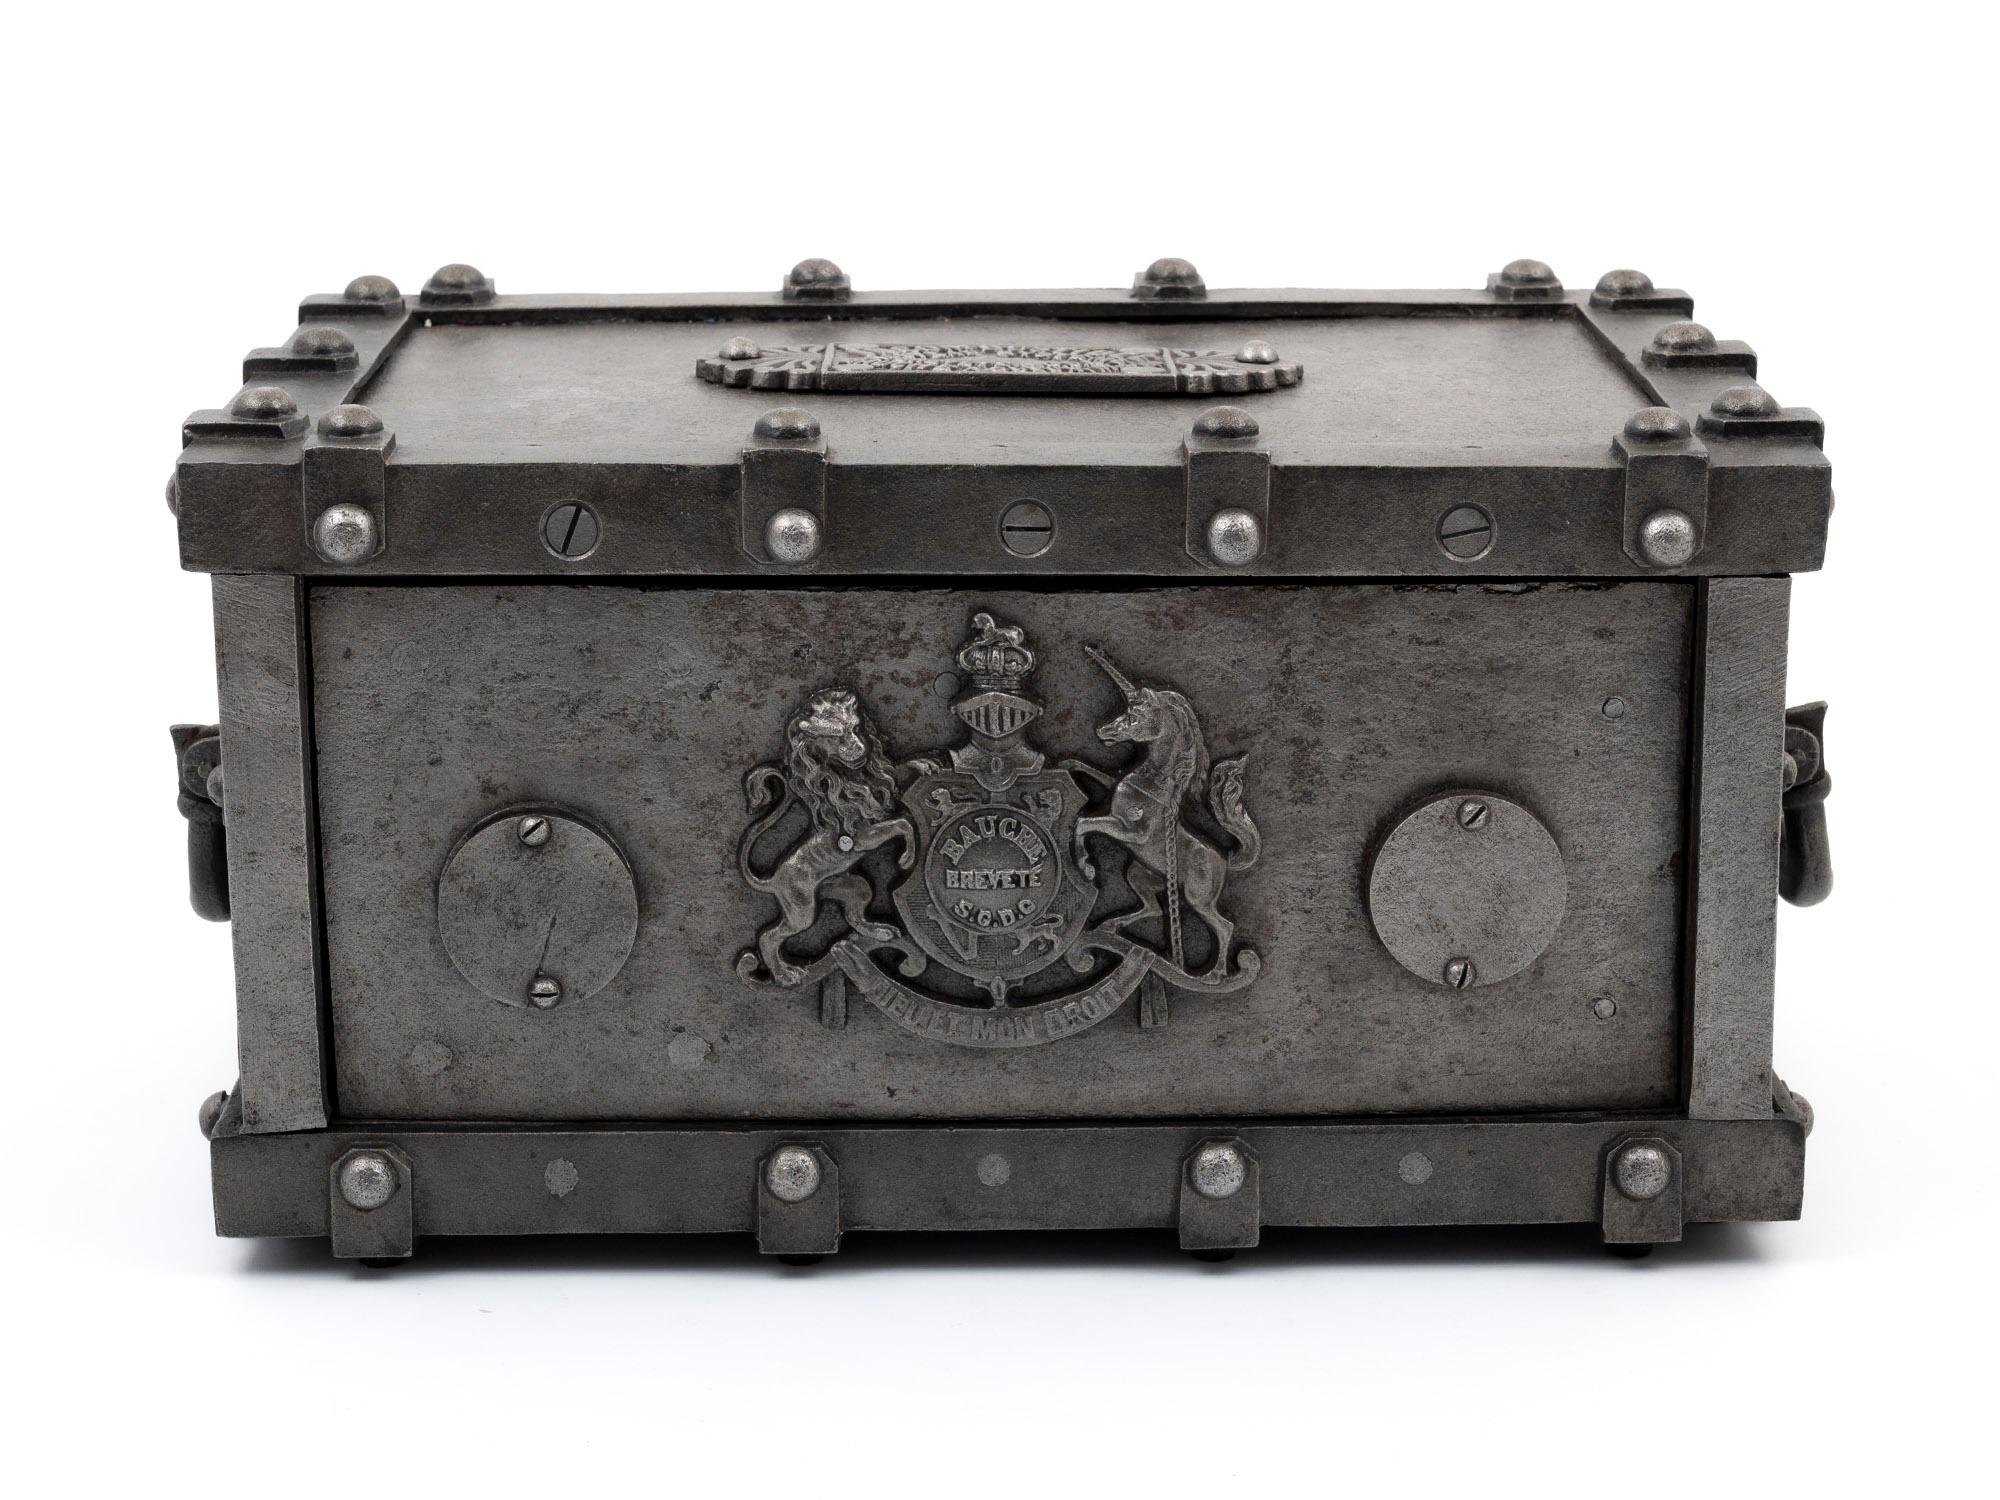 Cast Iron French strong box by Bauche Brevete

With a raw polished iron finish and a beautifully detailed Royal Coat of Arms for the United Kingdom mounted on the front complete with the motto: 